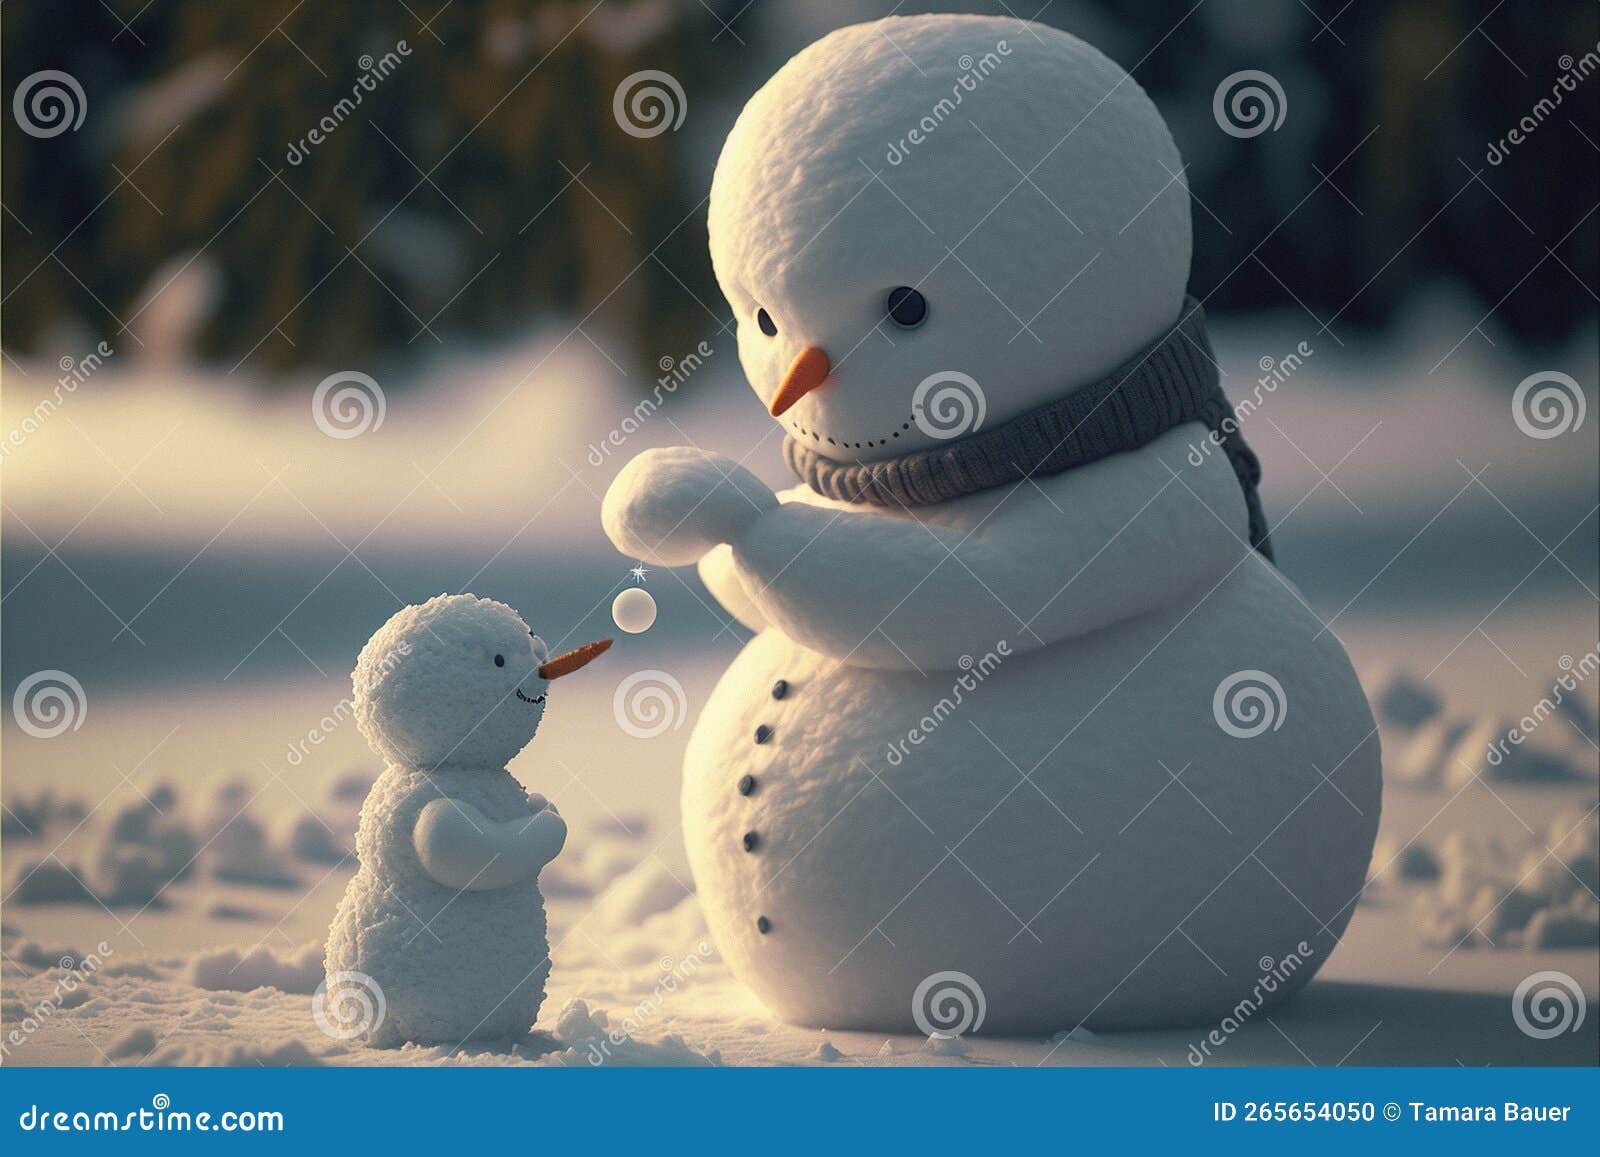 snowman playing with a smaller snowman in winter